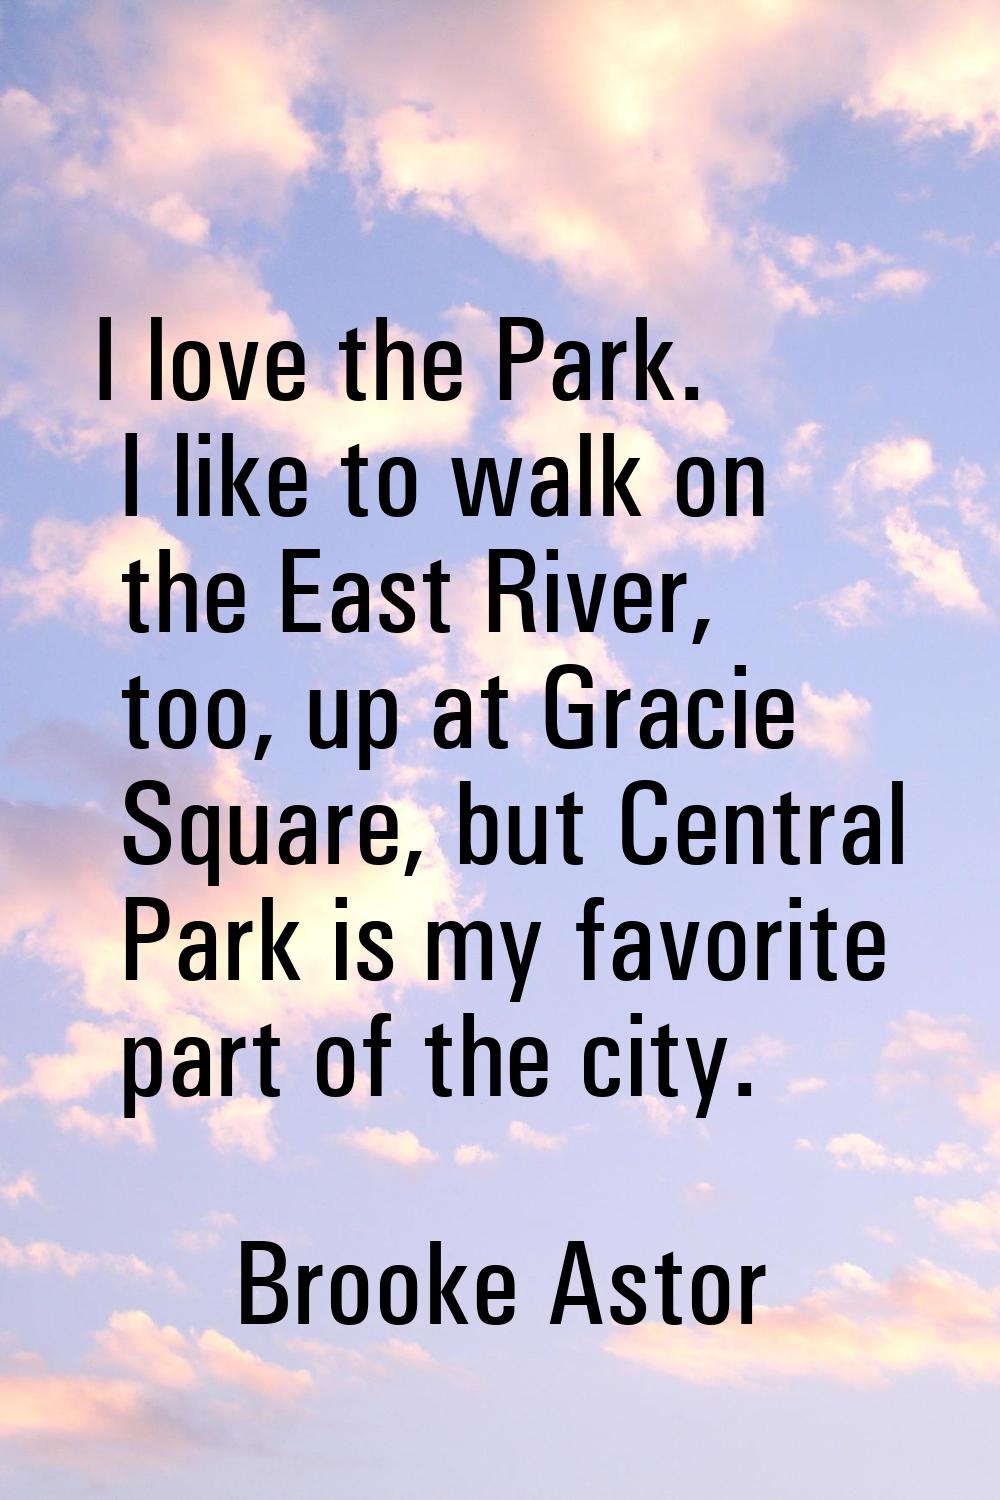 I love the Park. I like to walk on the East River, too, up at Gracie Square, but Central Park is my